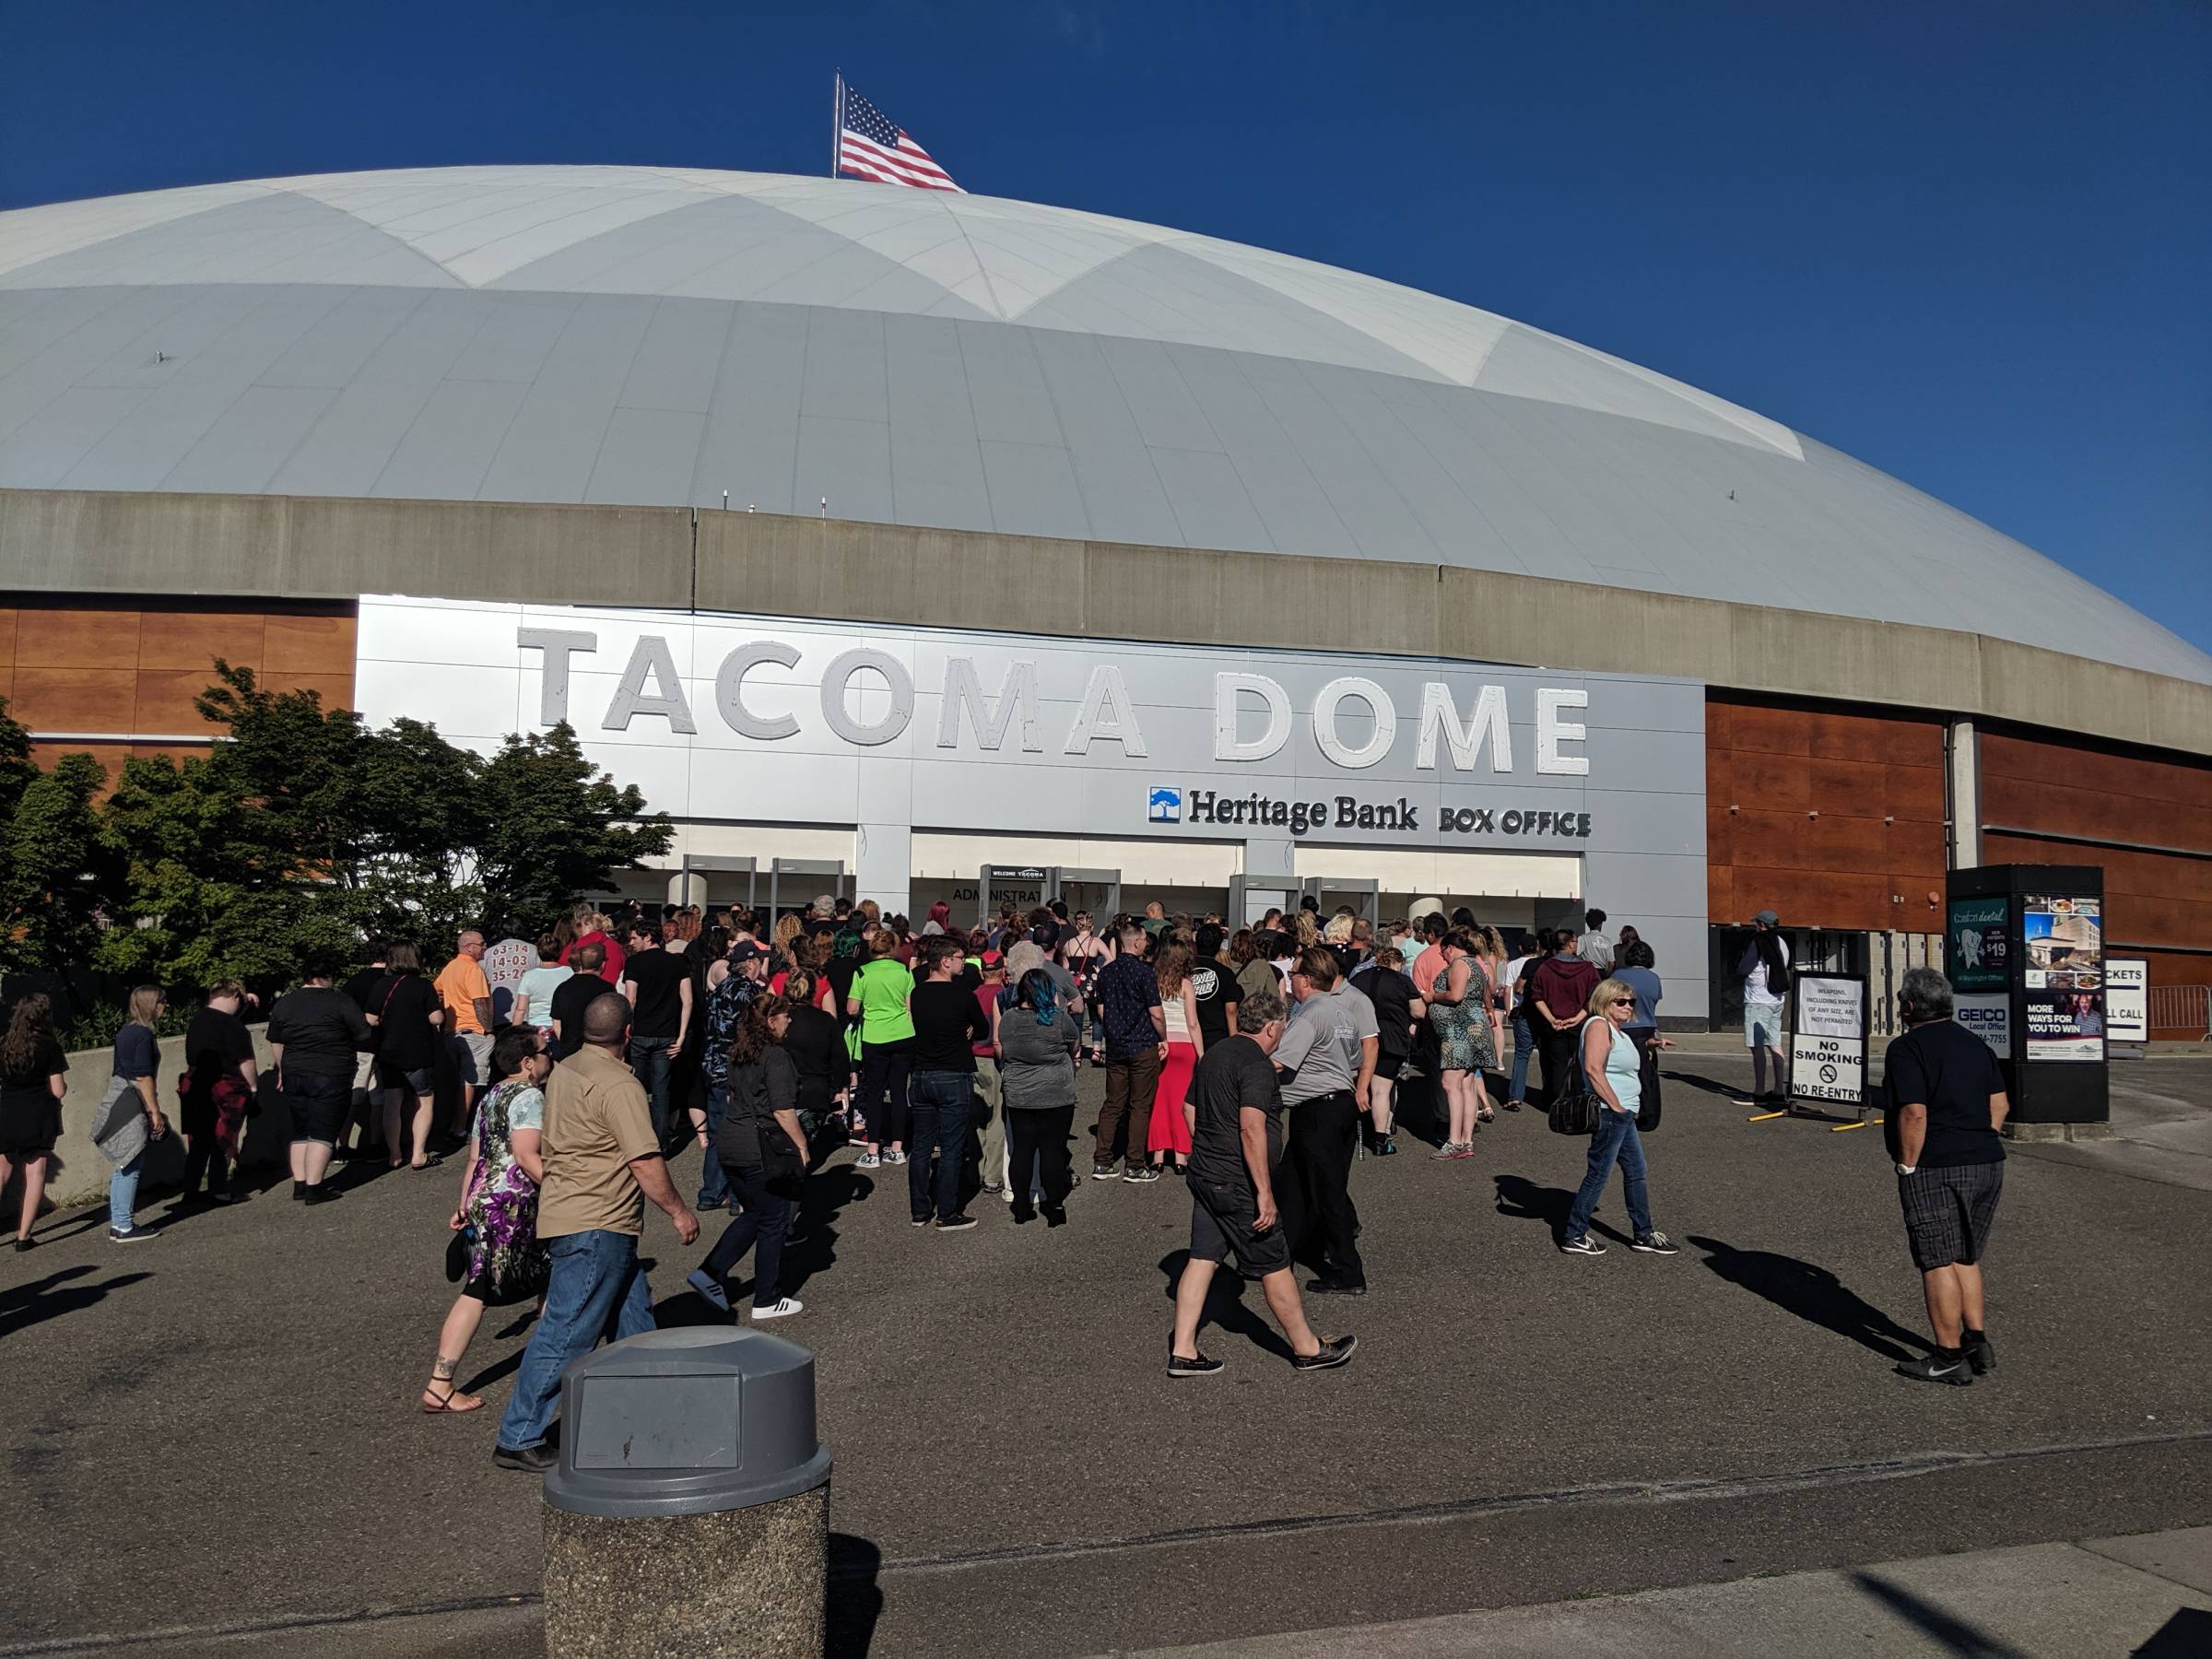 tacoma dome concerts in 1994